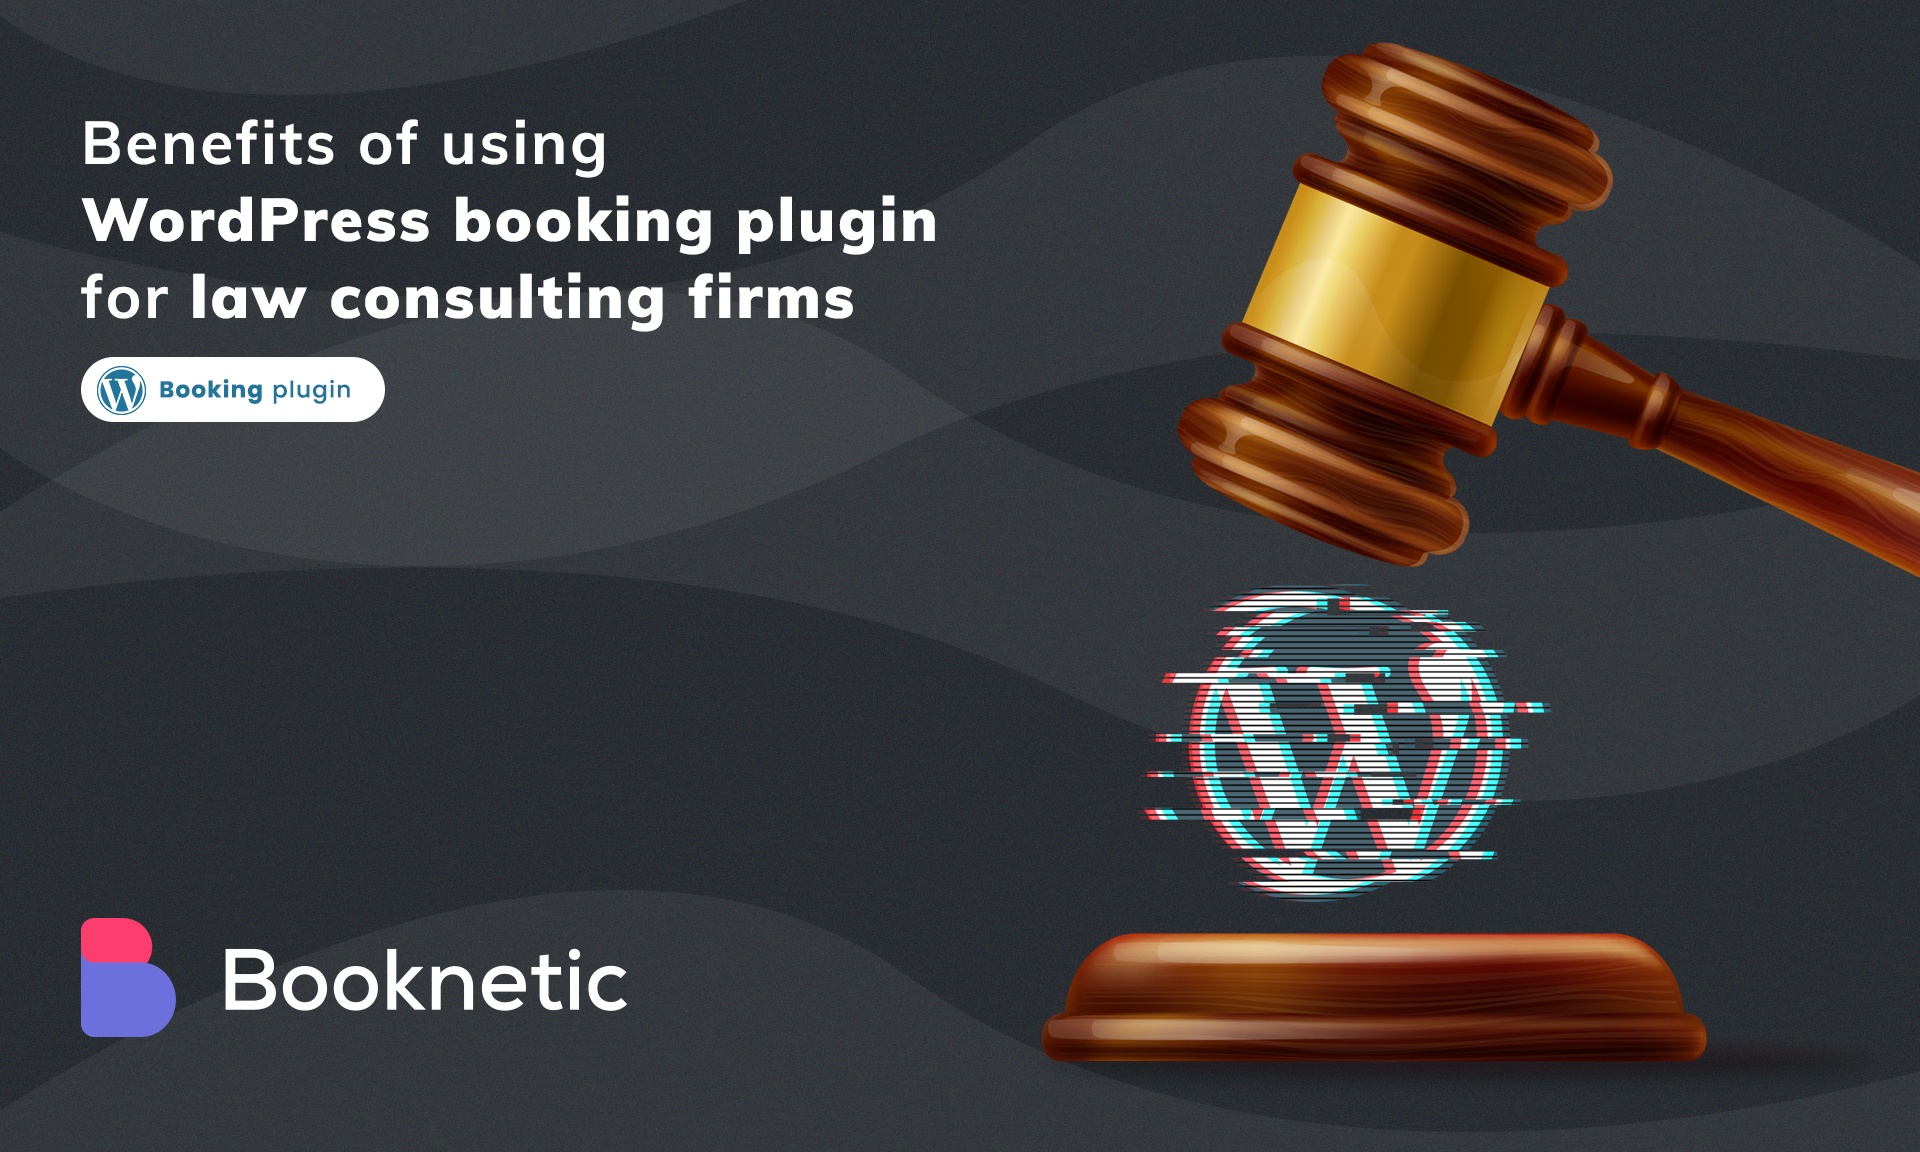 Benefits Of Law Firm WordPress Plugin For Appointment Booking?